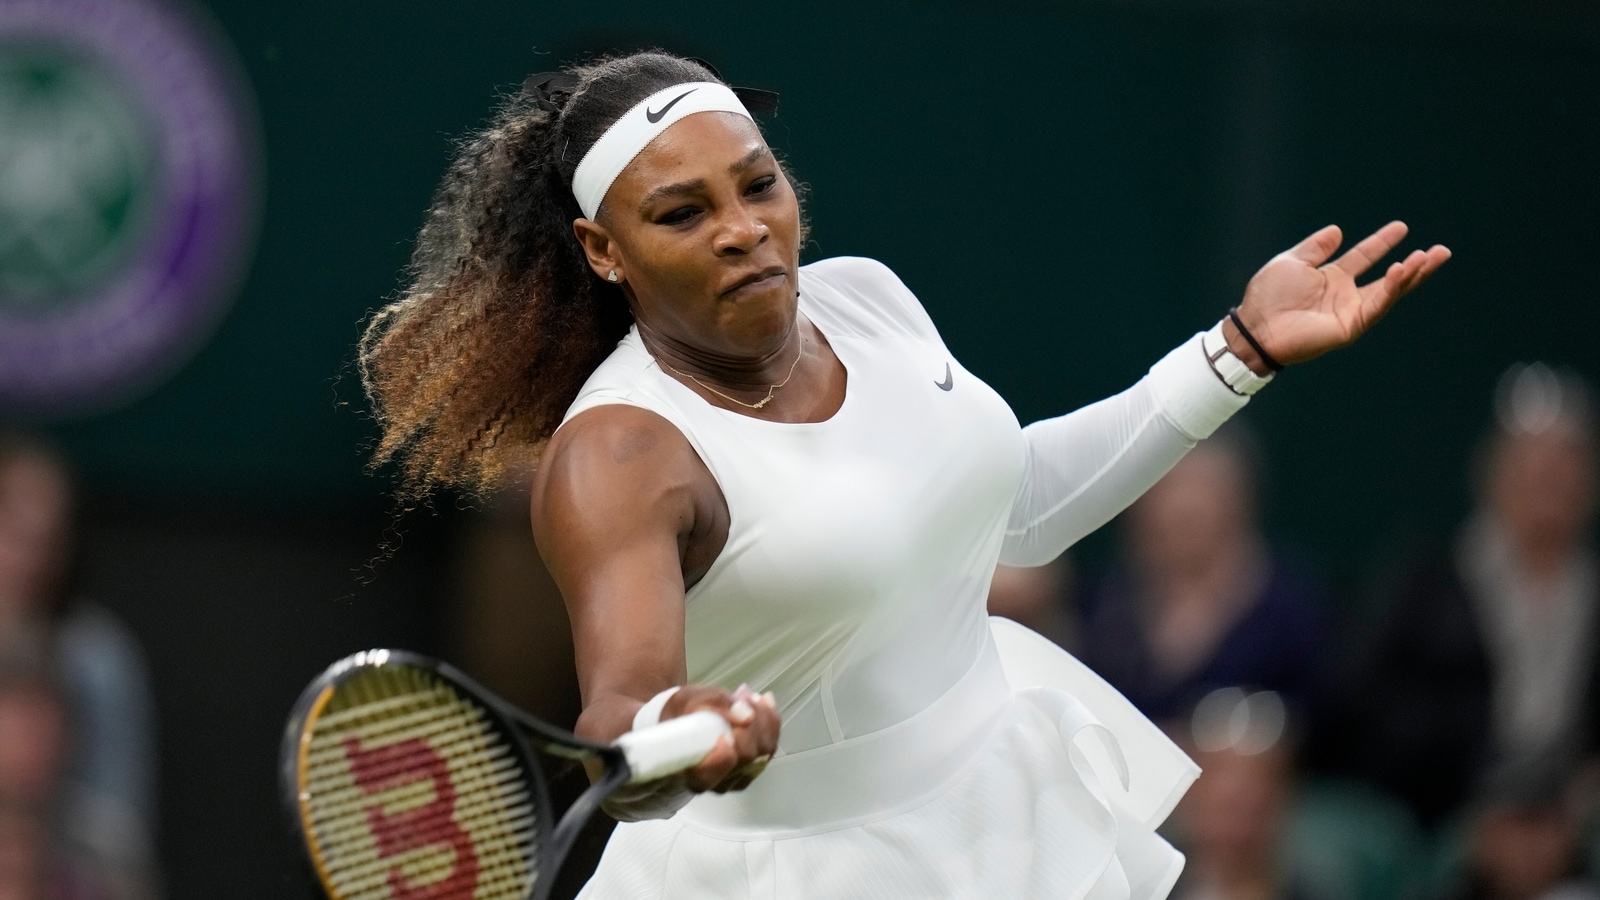 The importance of Serena Williams